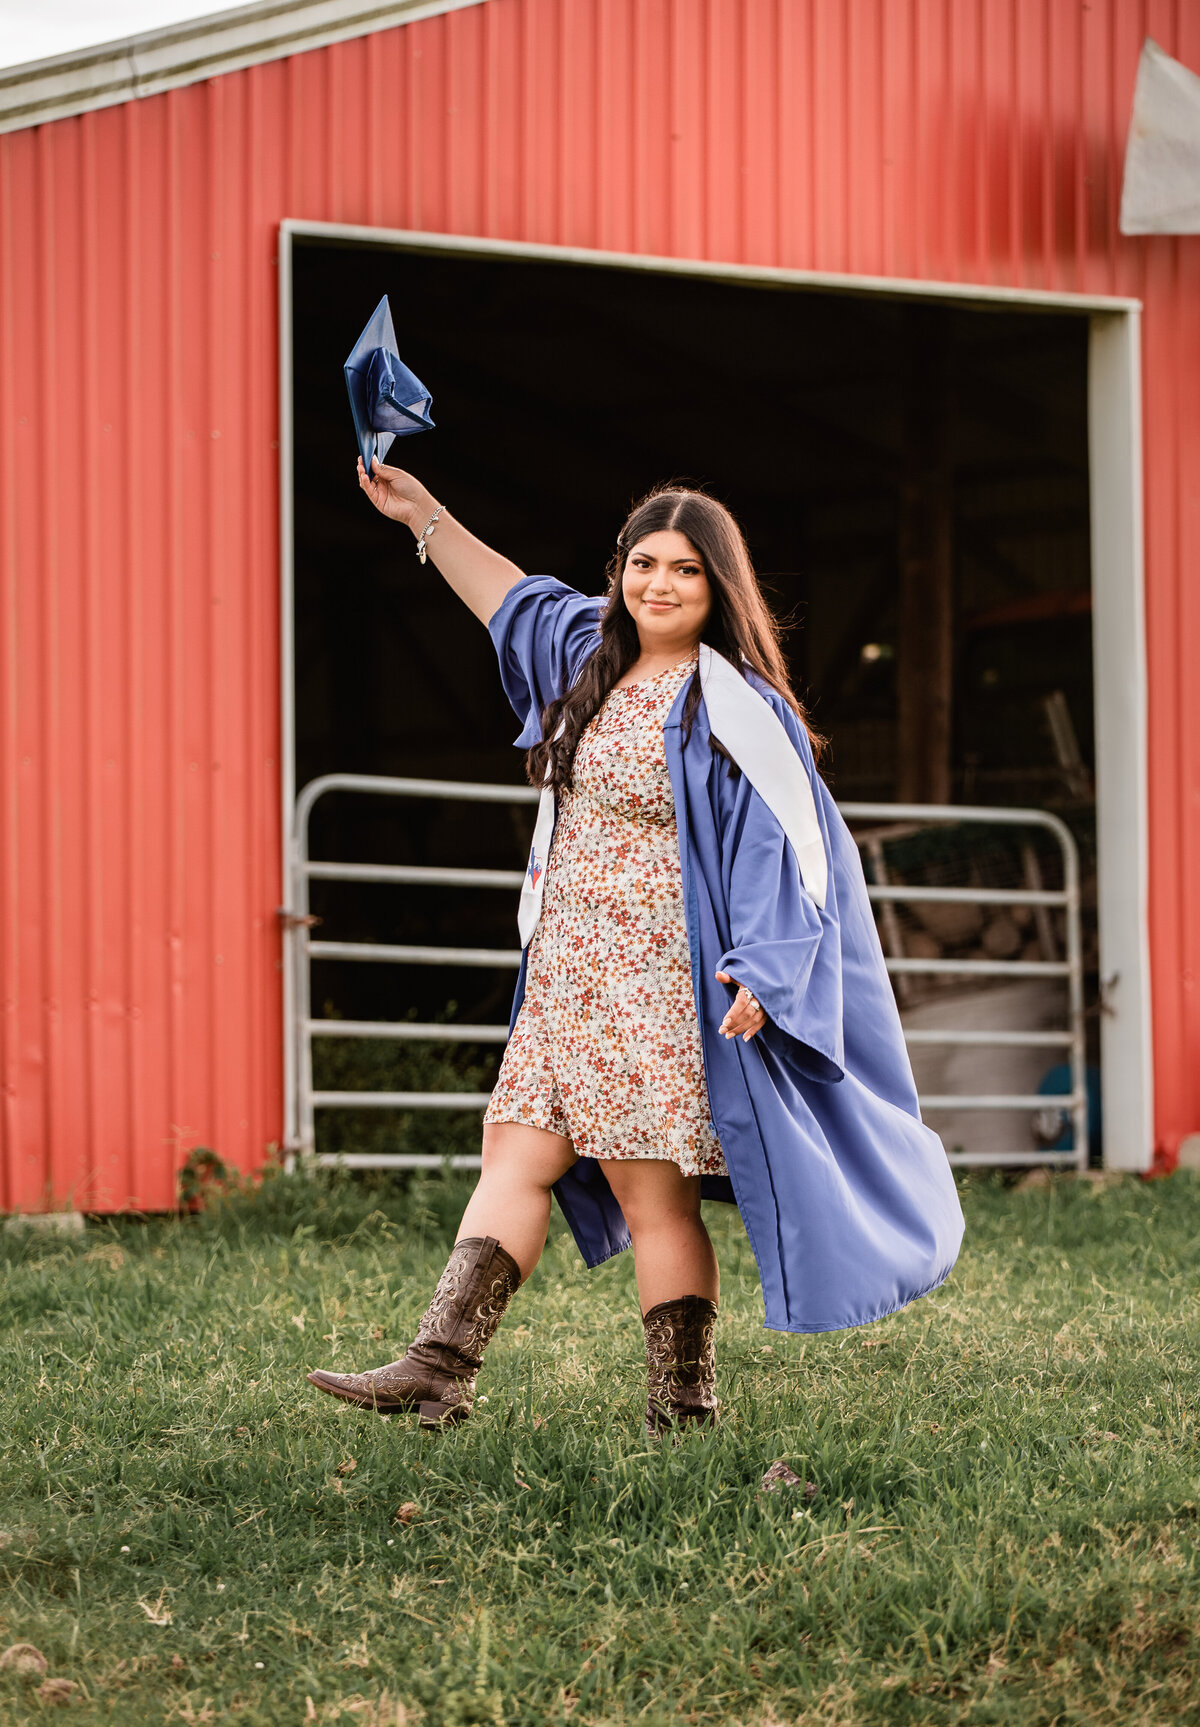 A senior holds her blue cap in the air in front of a red barn in celebration of her upcoming graduation.